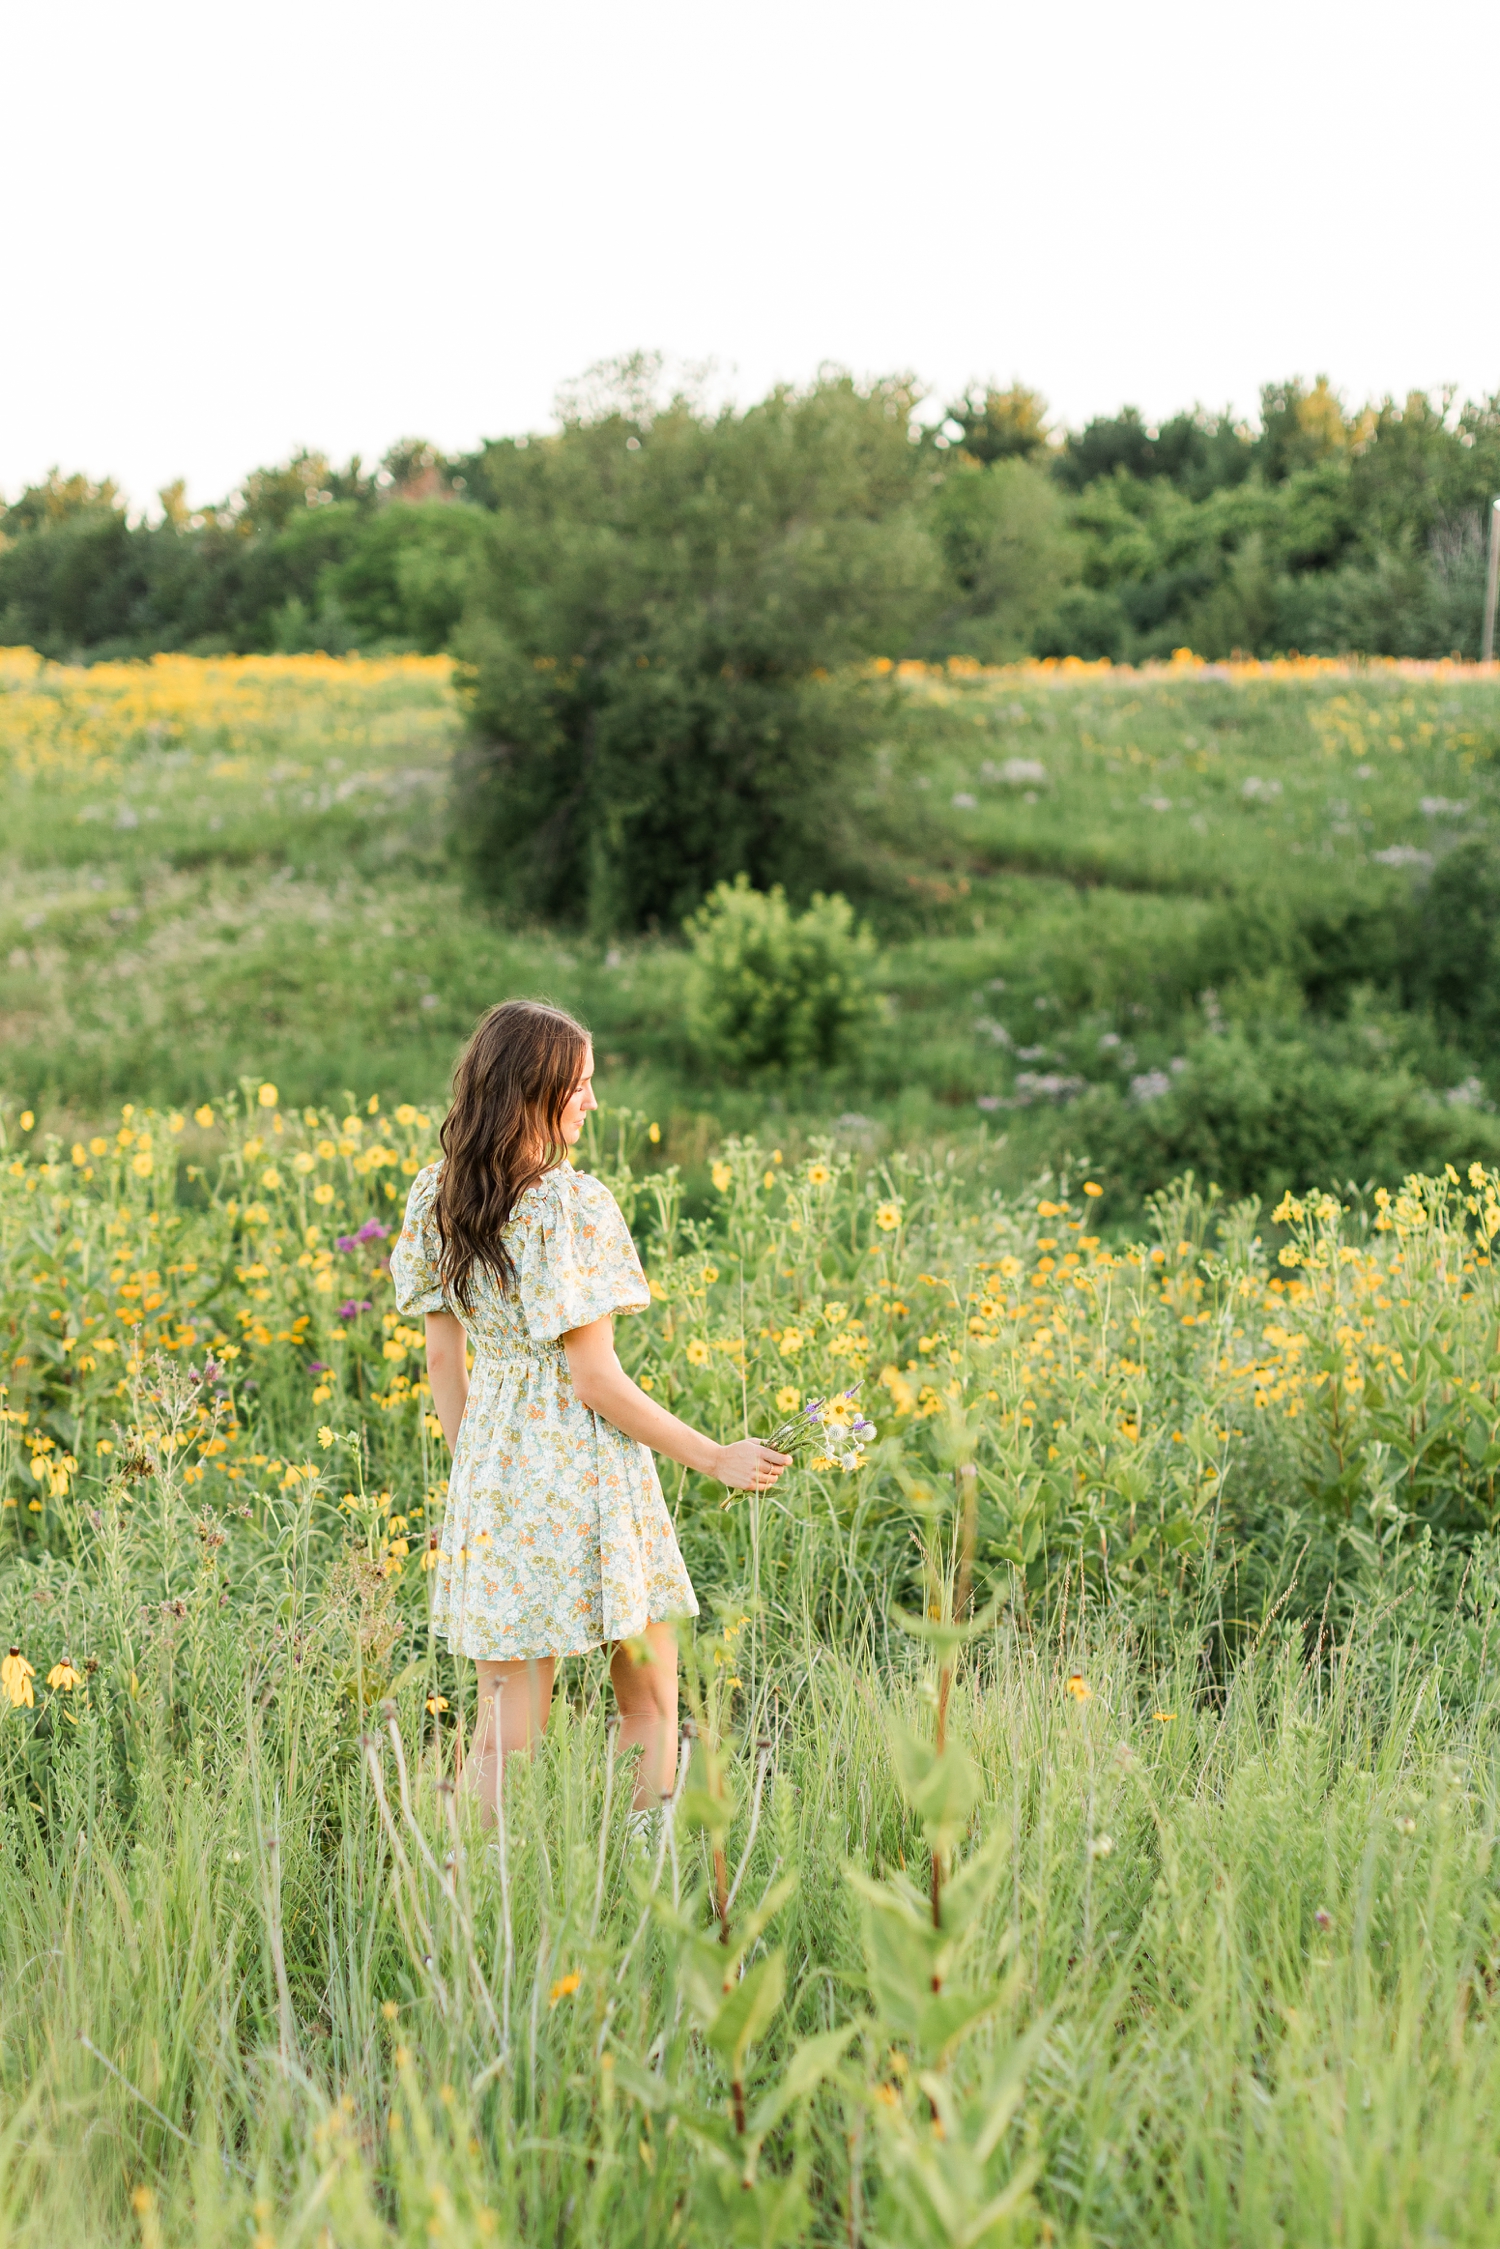 Mallory walks through a field of wildflowers wearing a green and yellow floral dress | CB Studio